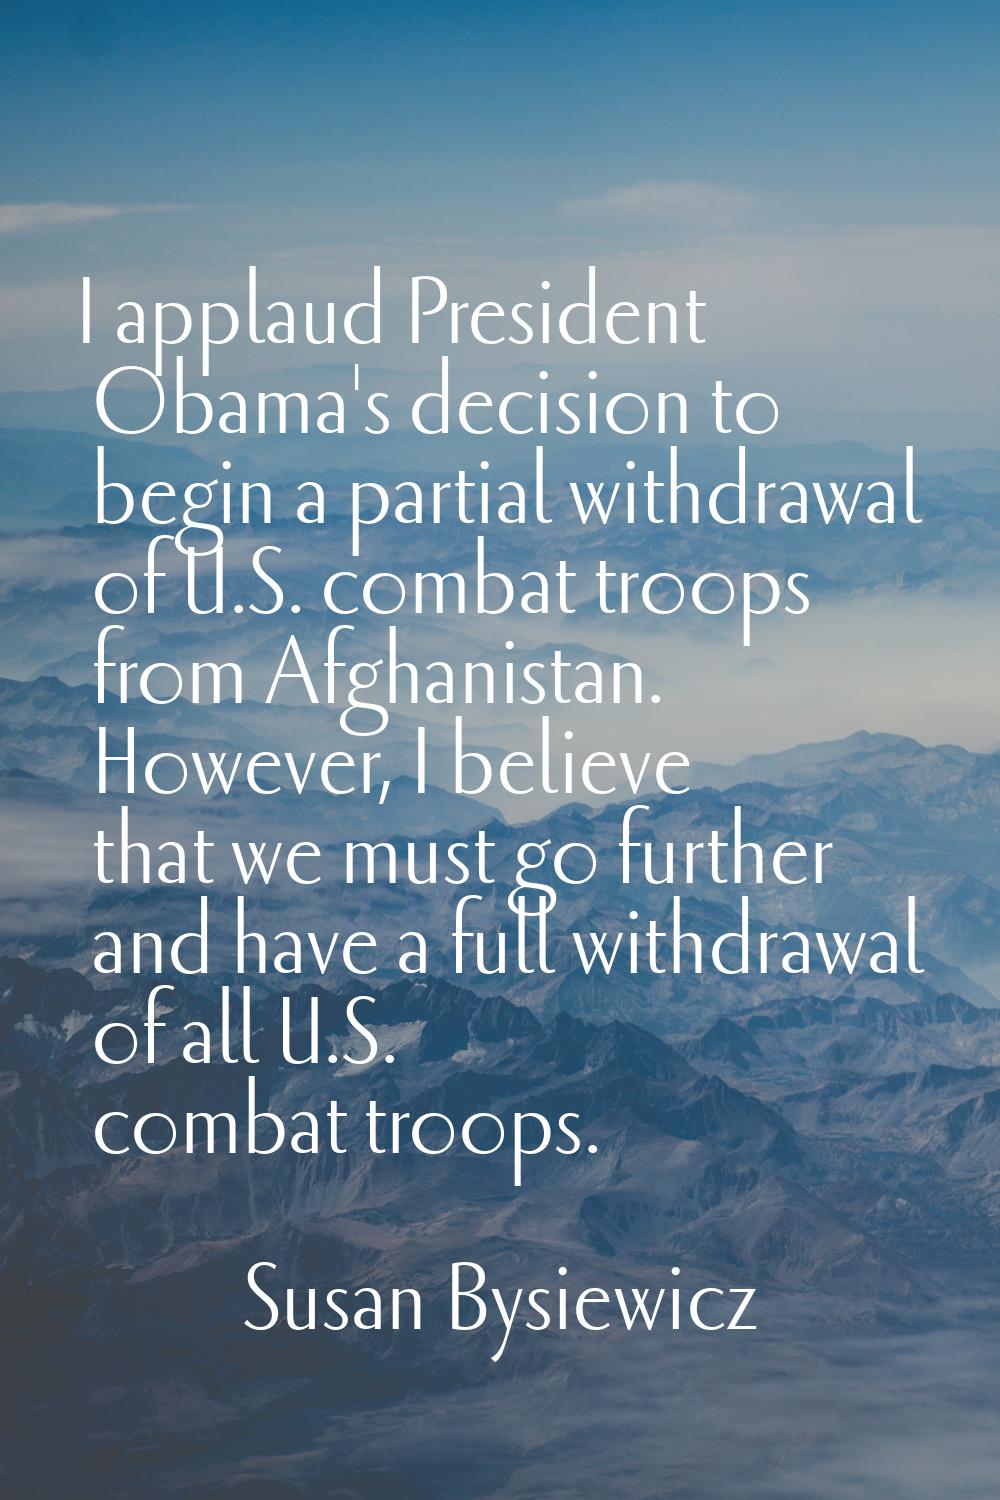 I applaud President Obama's decision to begin a partial withdrawal of U.S. combat troops from Afgha